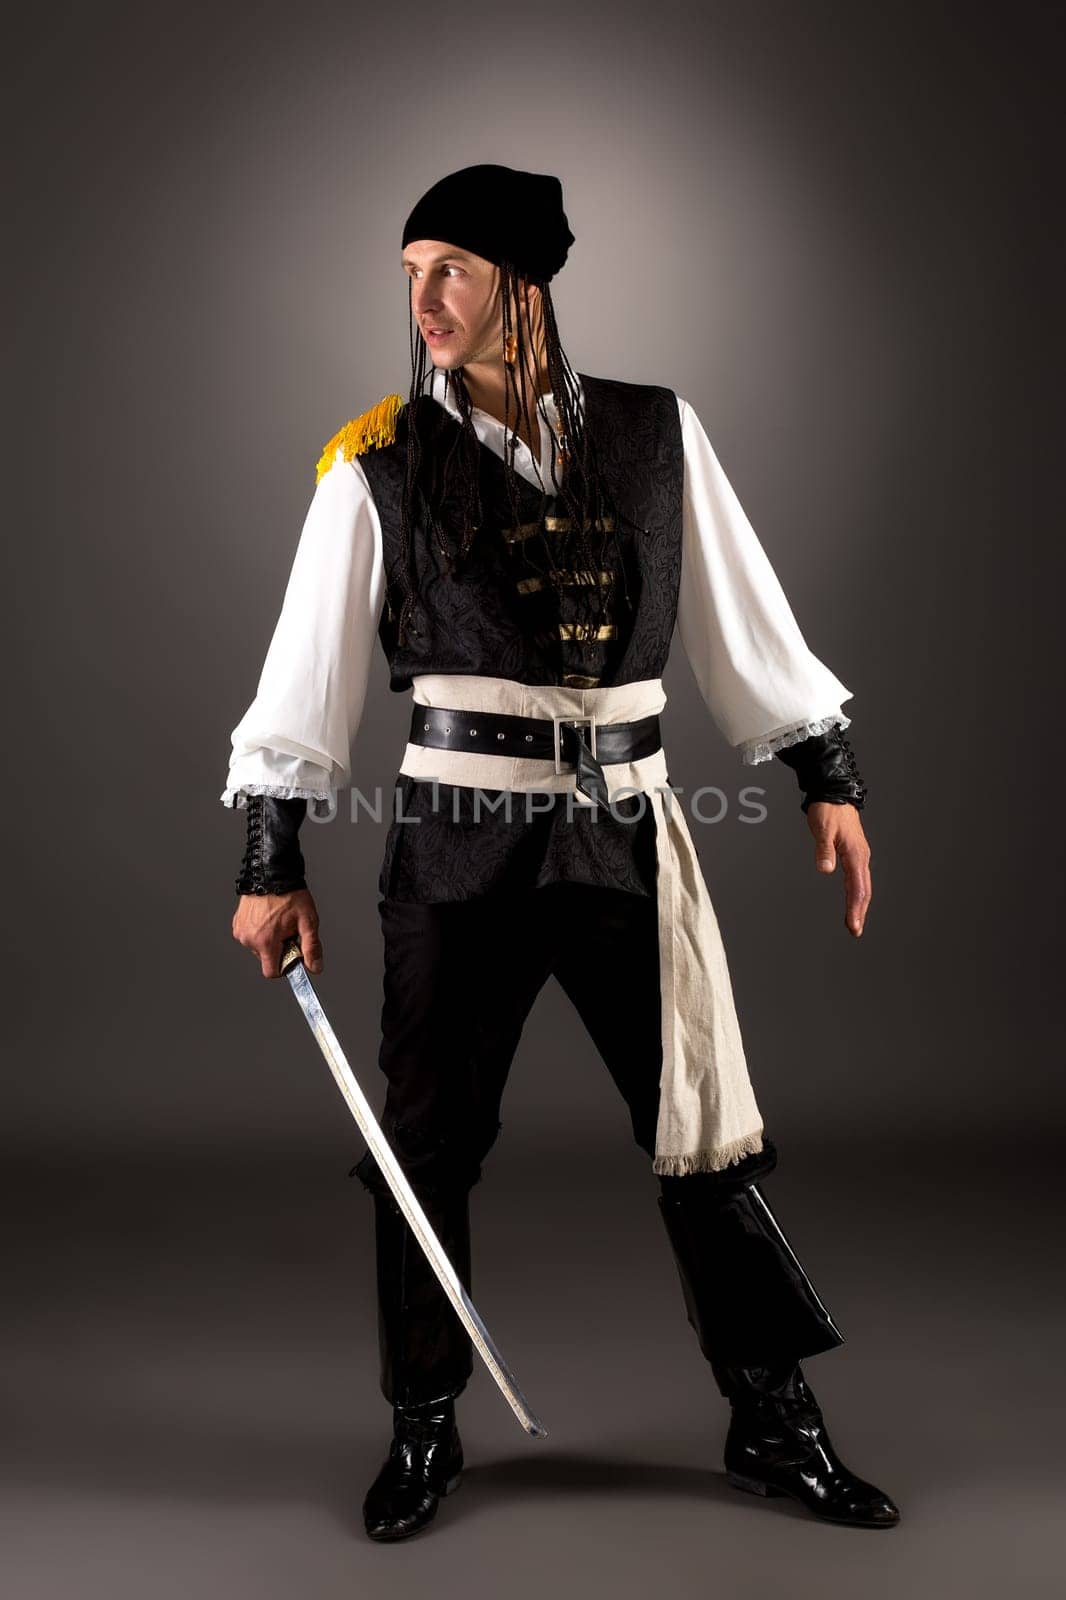 Daring pirate with saber. Studio photo on gray background